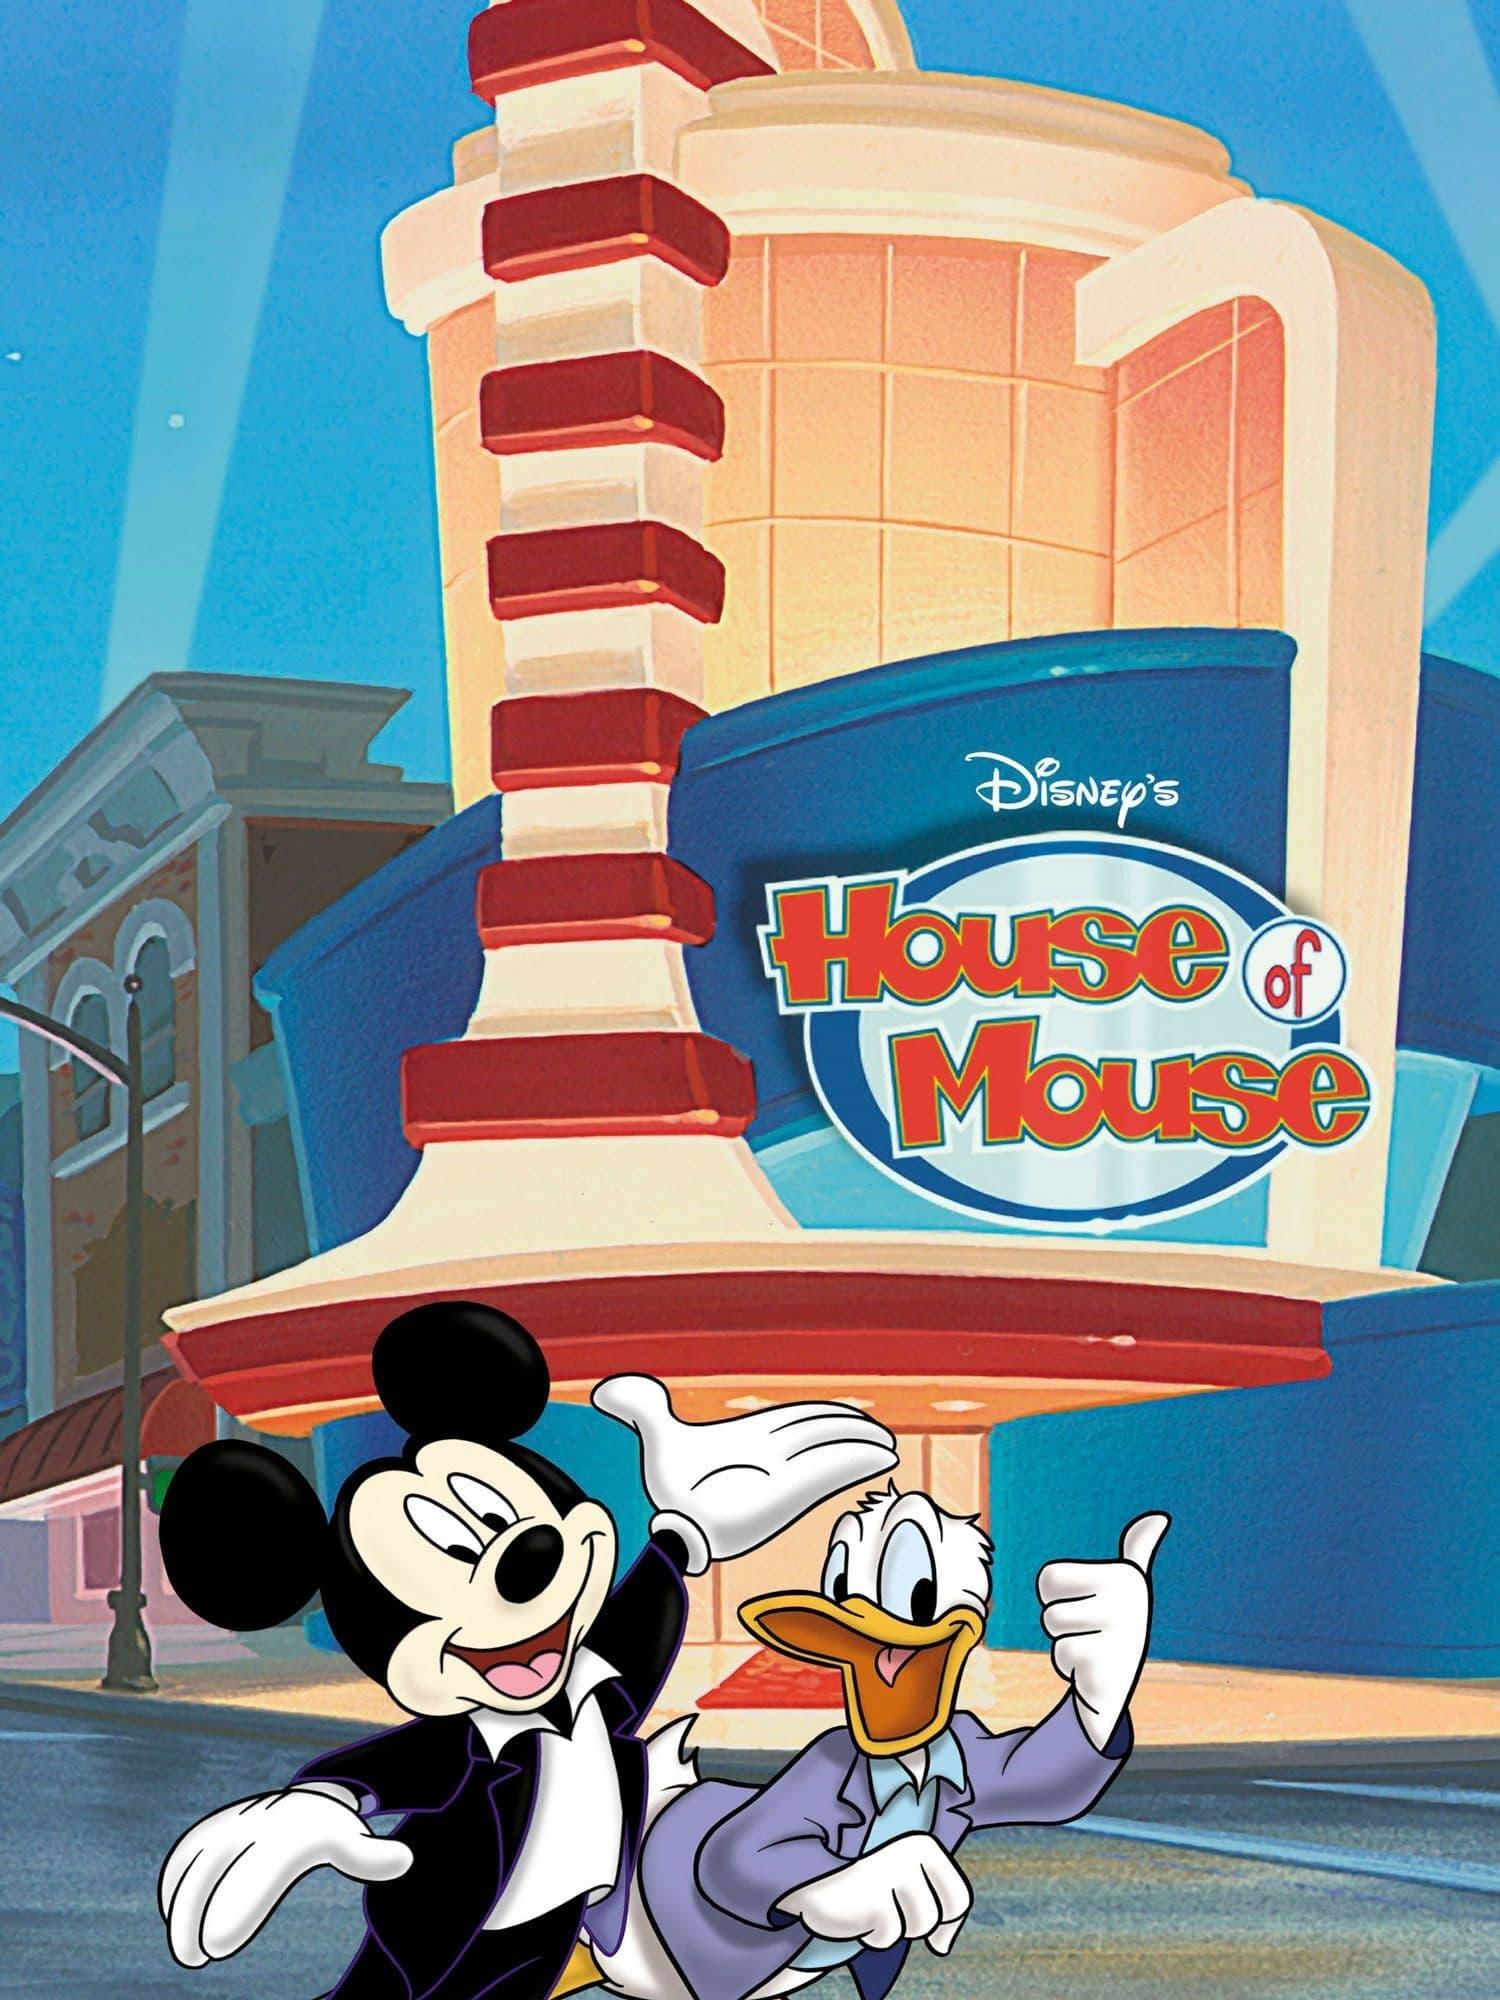 Disney's House of Mouse poster